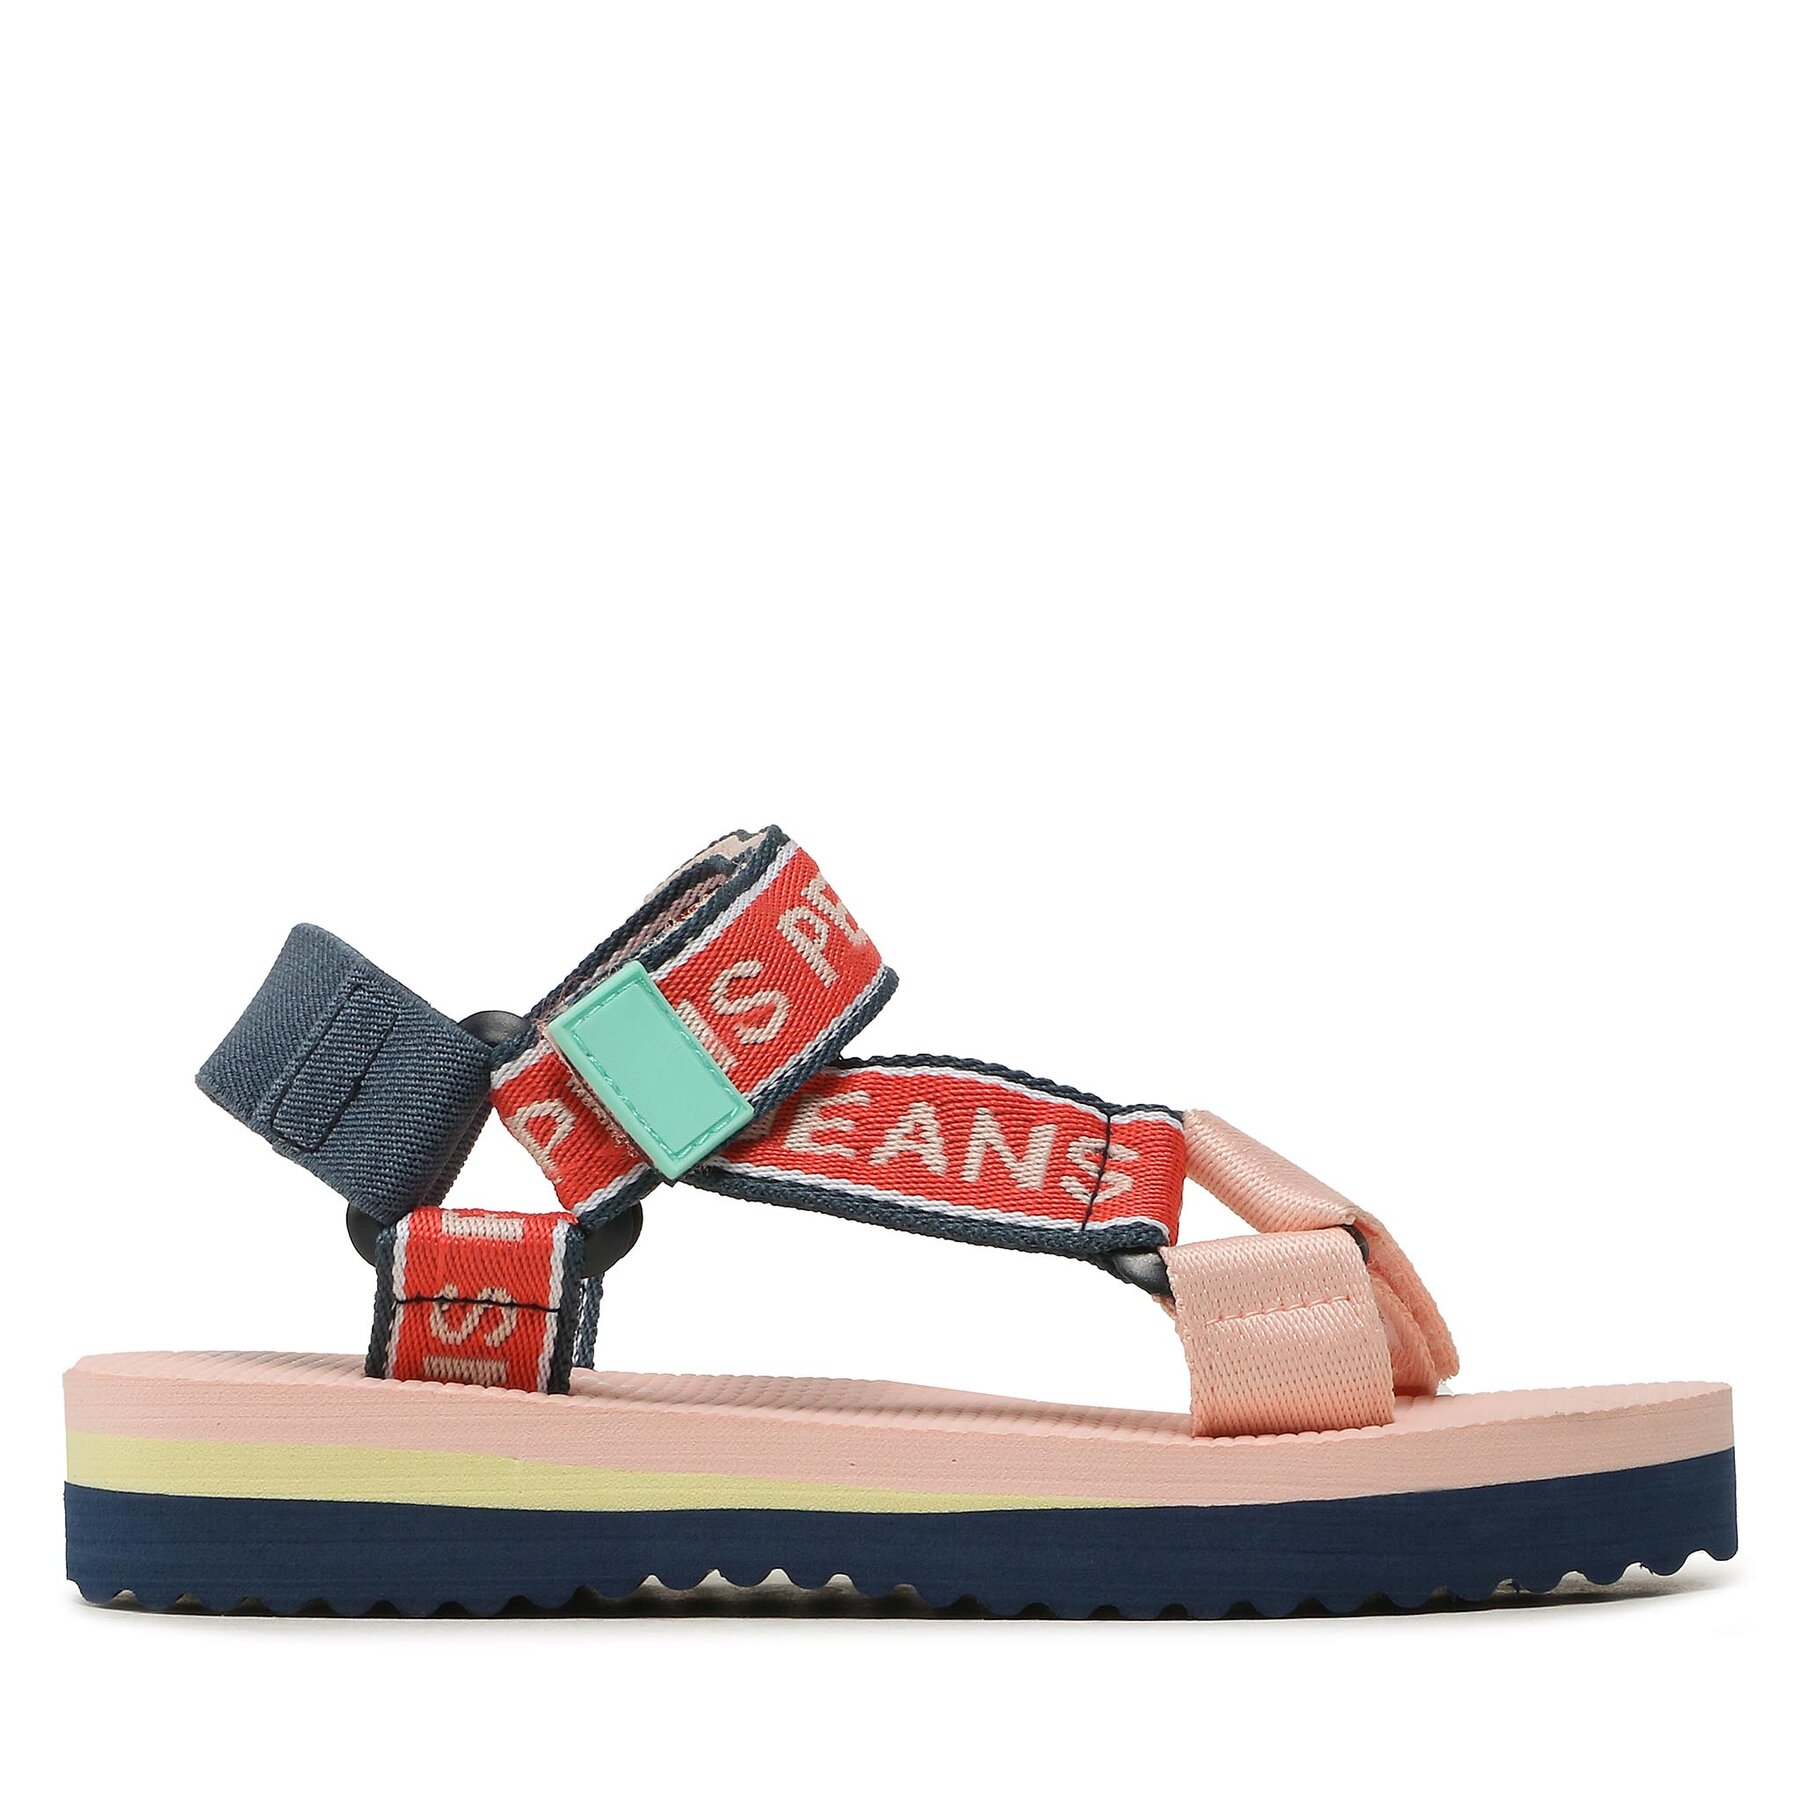 Sandalen Pepe Jeans Pool Sally G PGS70057 Pink 325 von Pepe Jeans